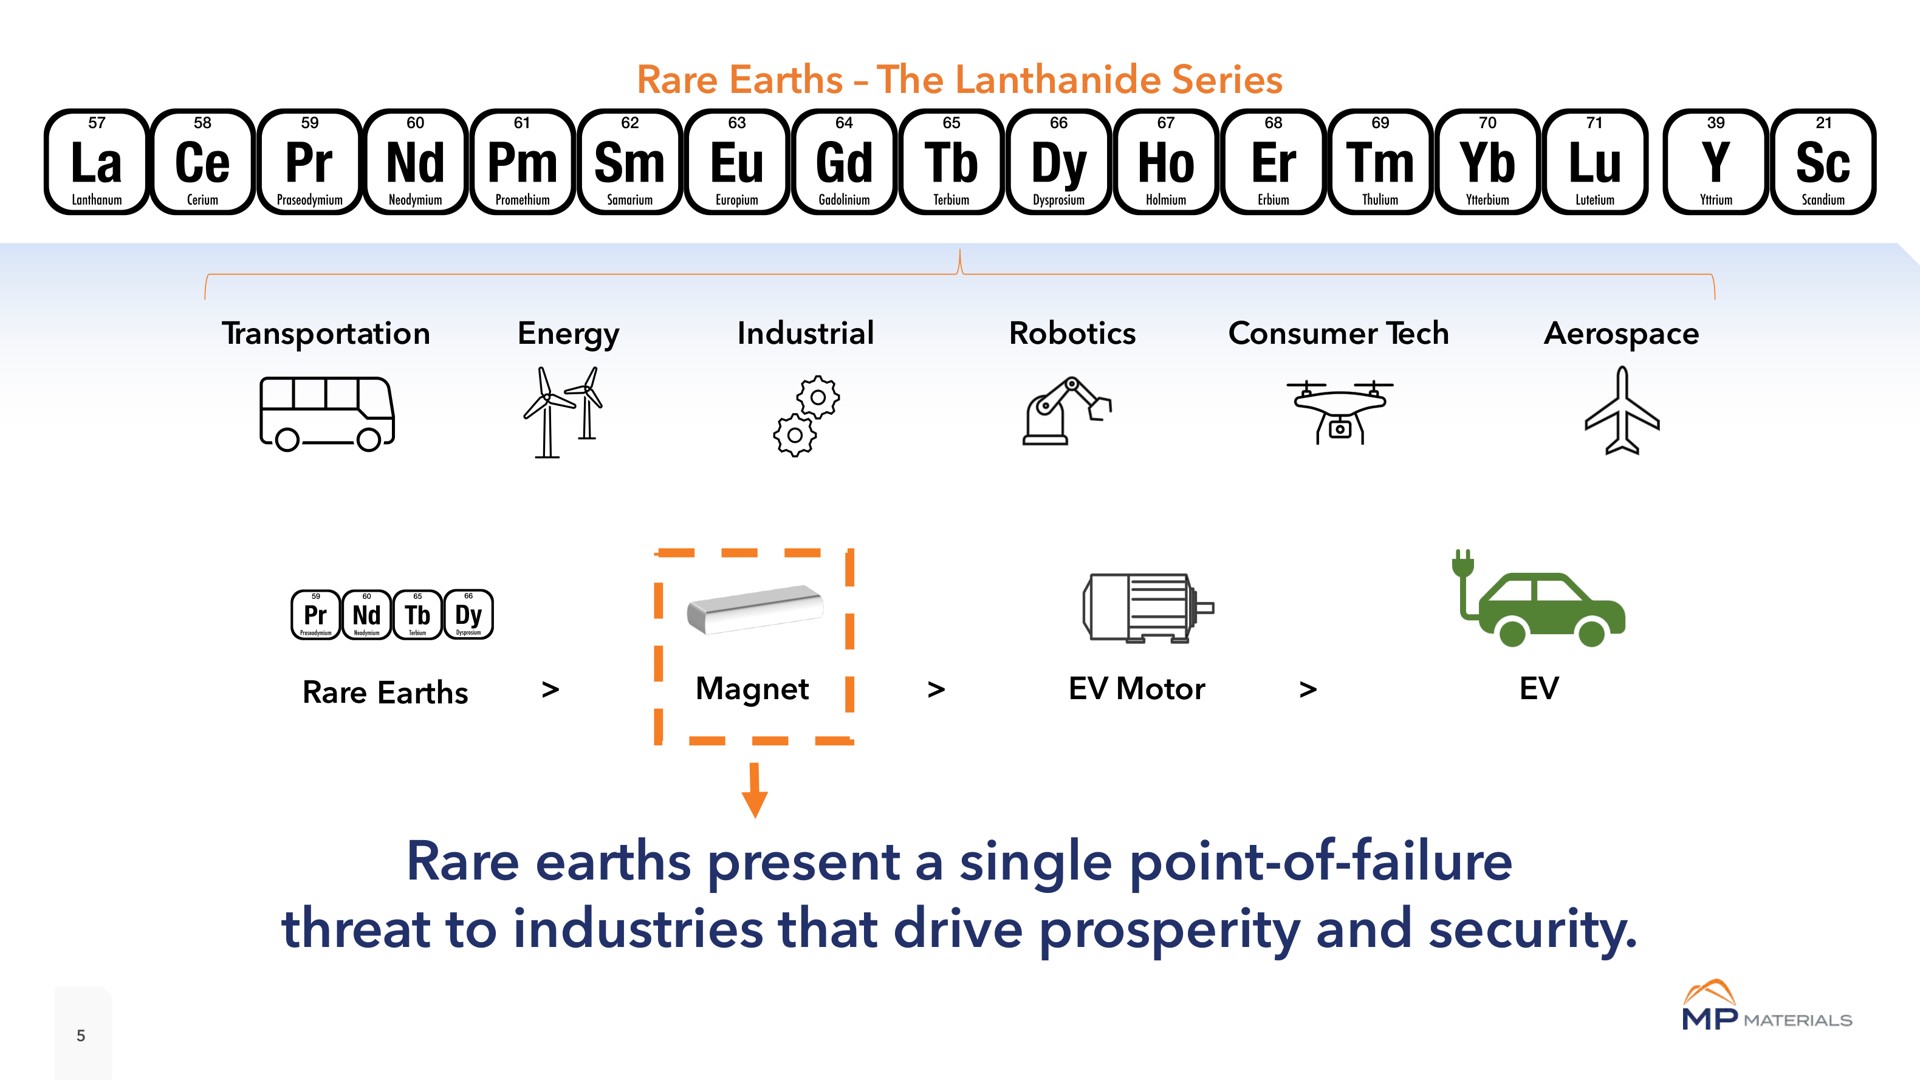 rare earths present a single point of failure threat to industries that drive prosperity and security | MP Materials